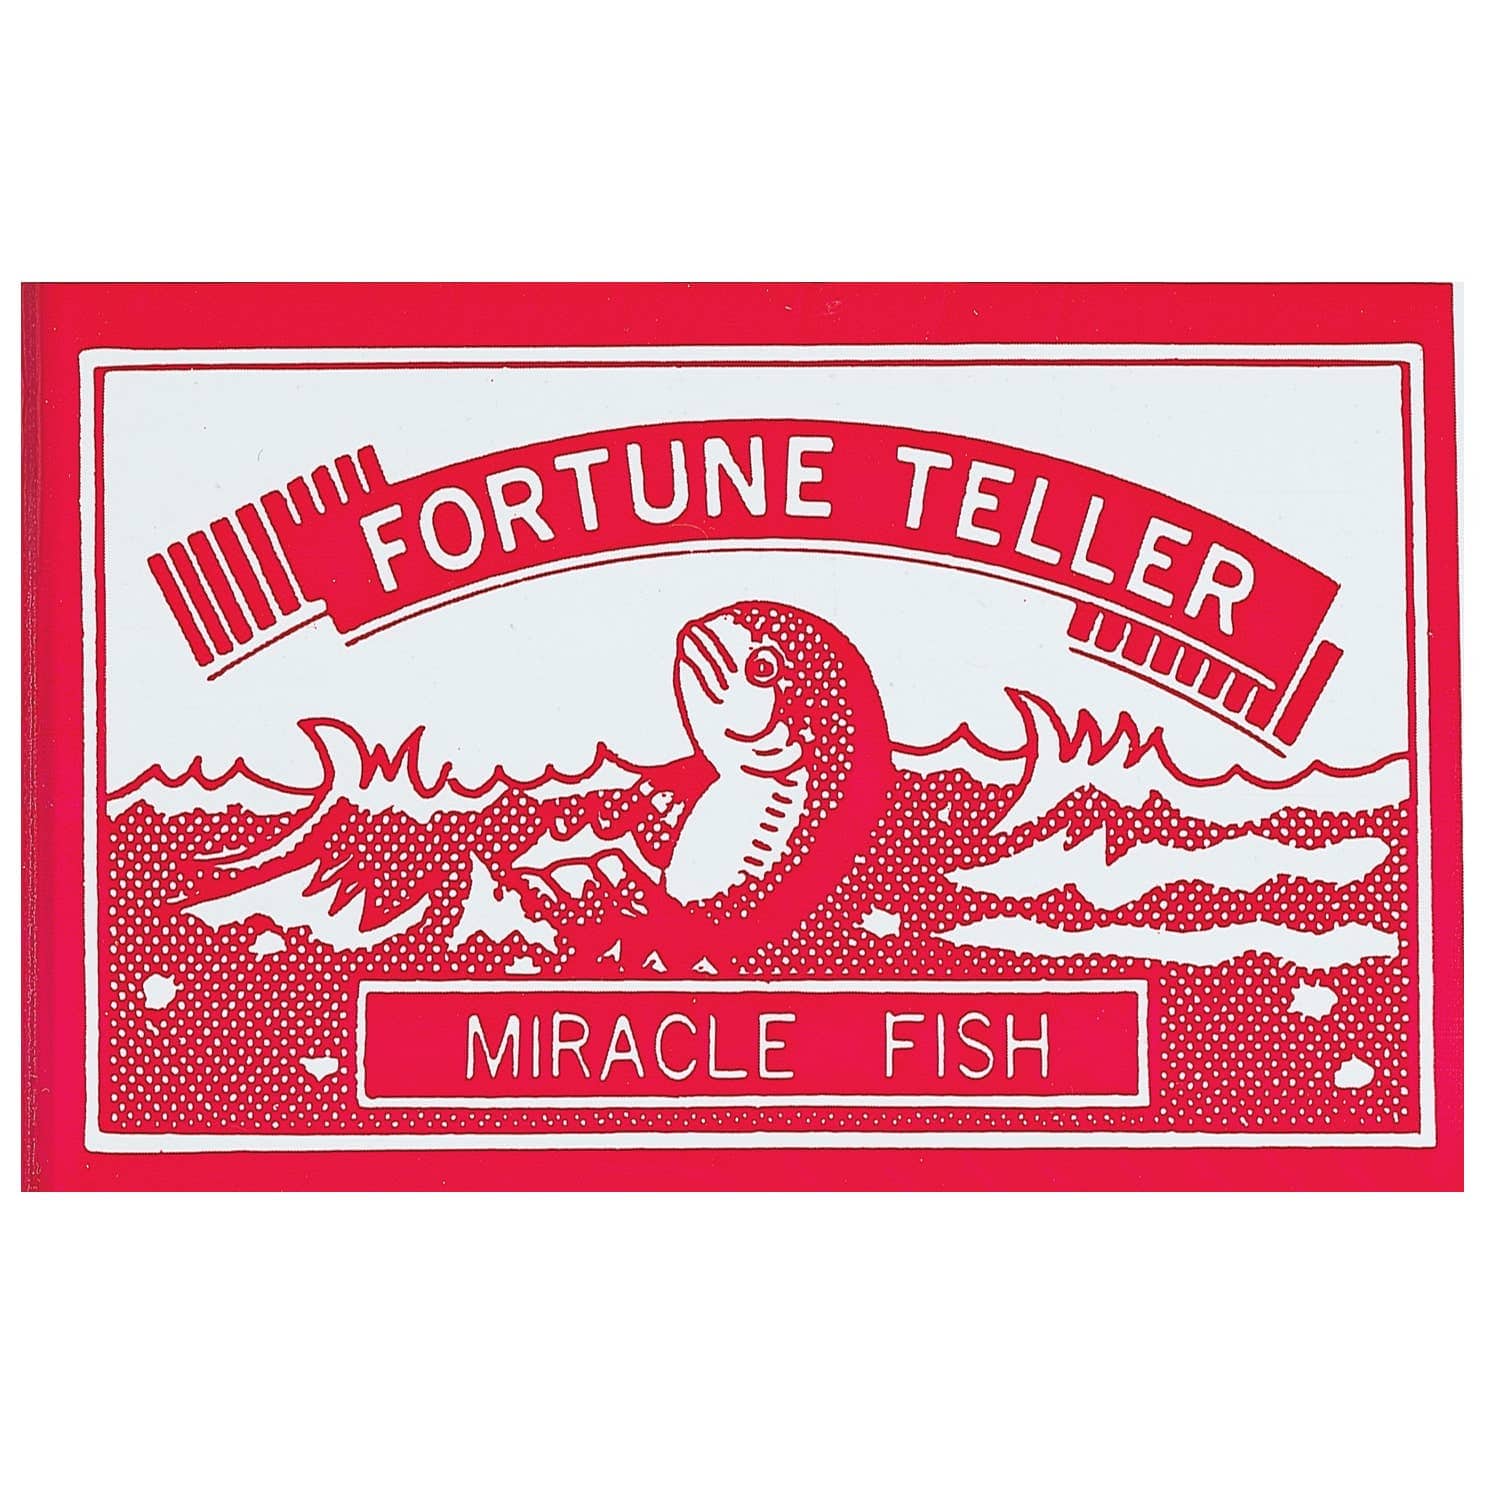 How Does the Fortune Teller Miracle Fish Work?